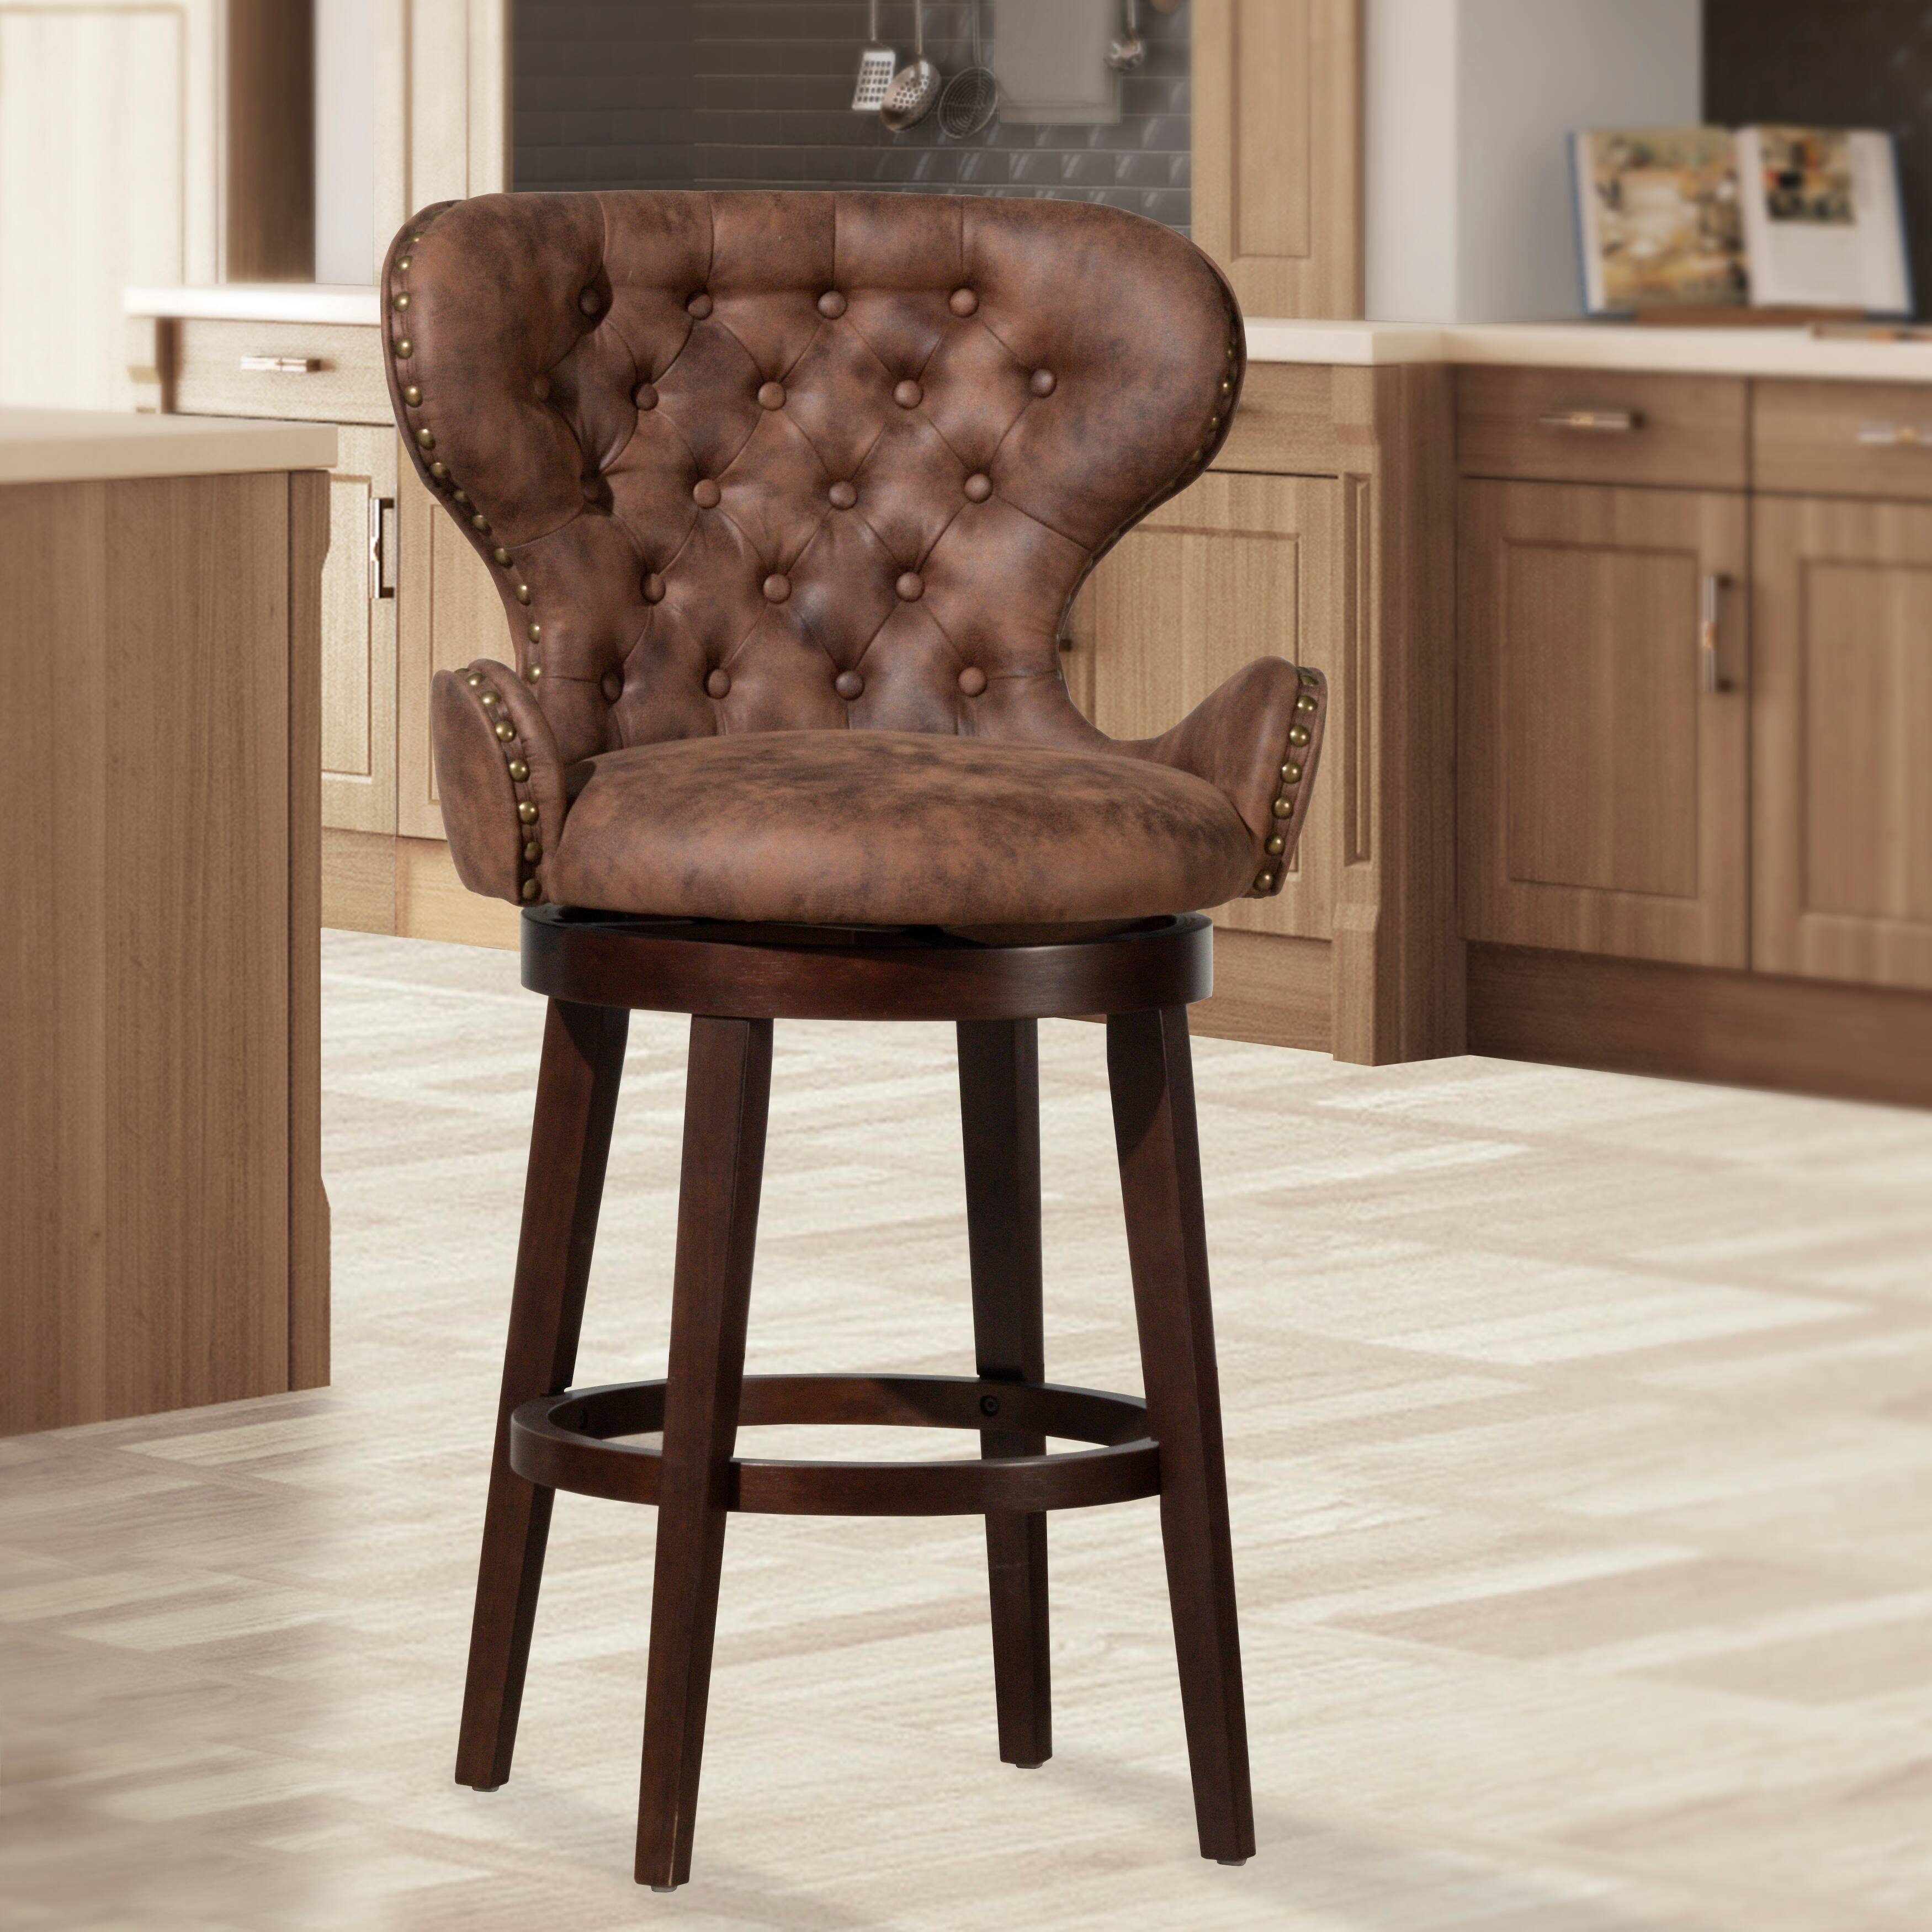 Wingback padded bar stools with backs and arms